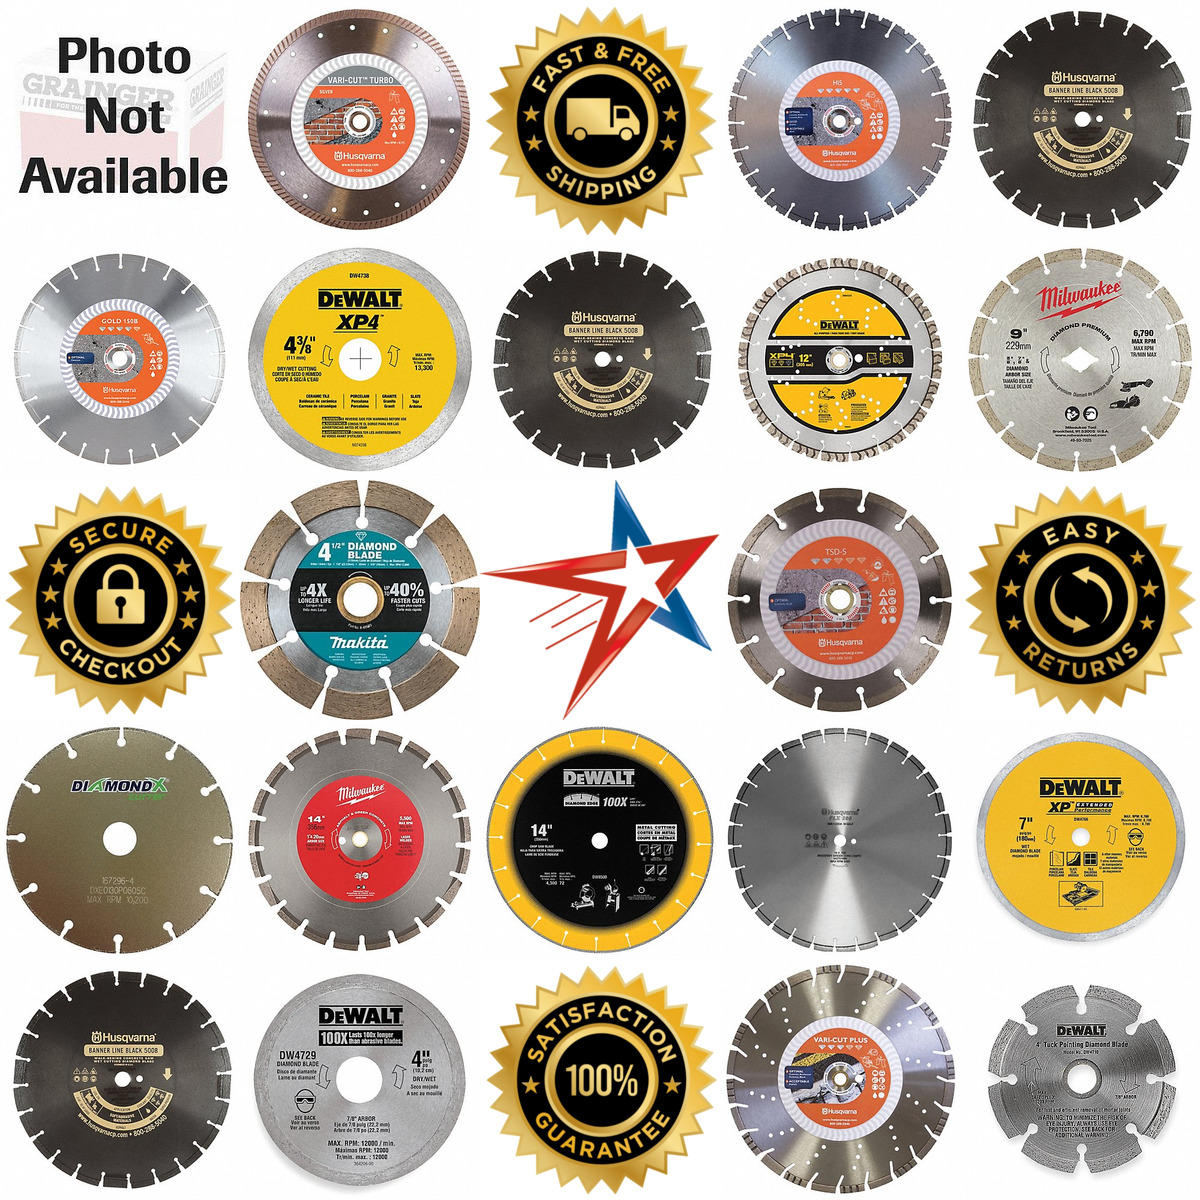 A selection of Diamond Saw Blades products on GoVets